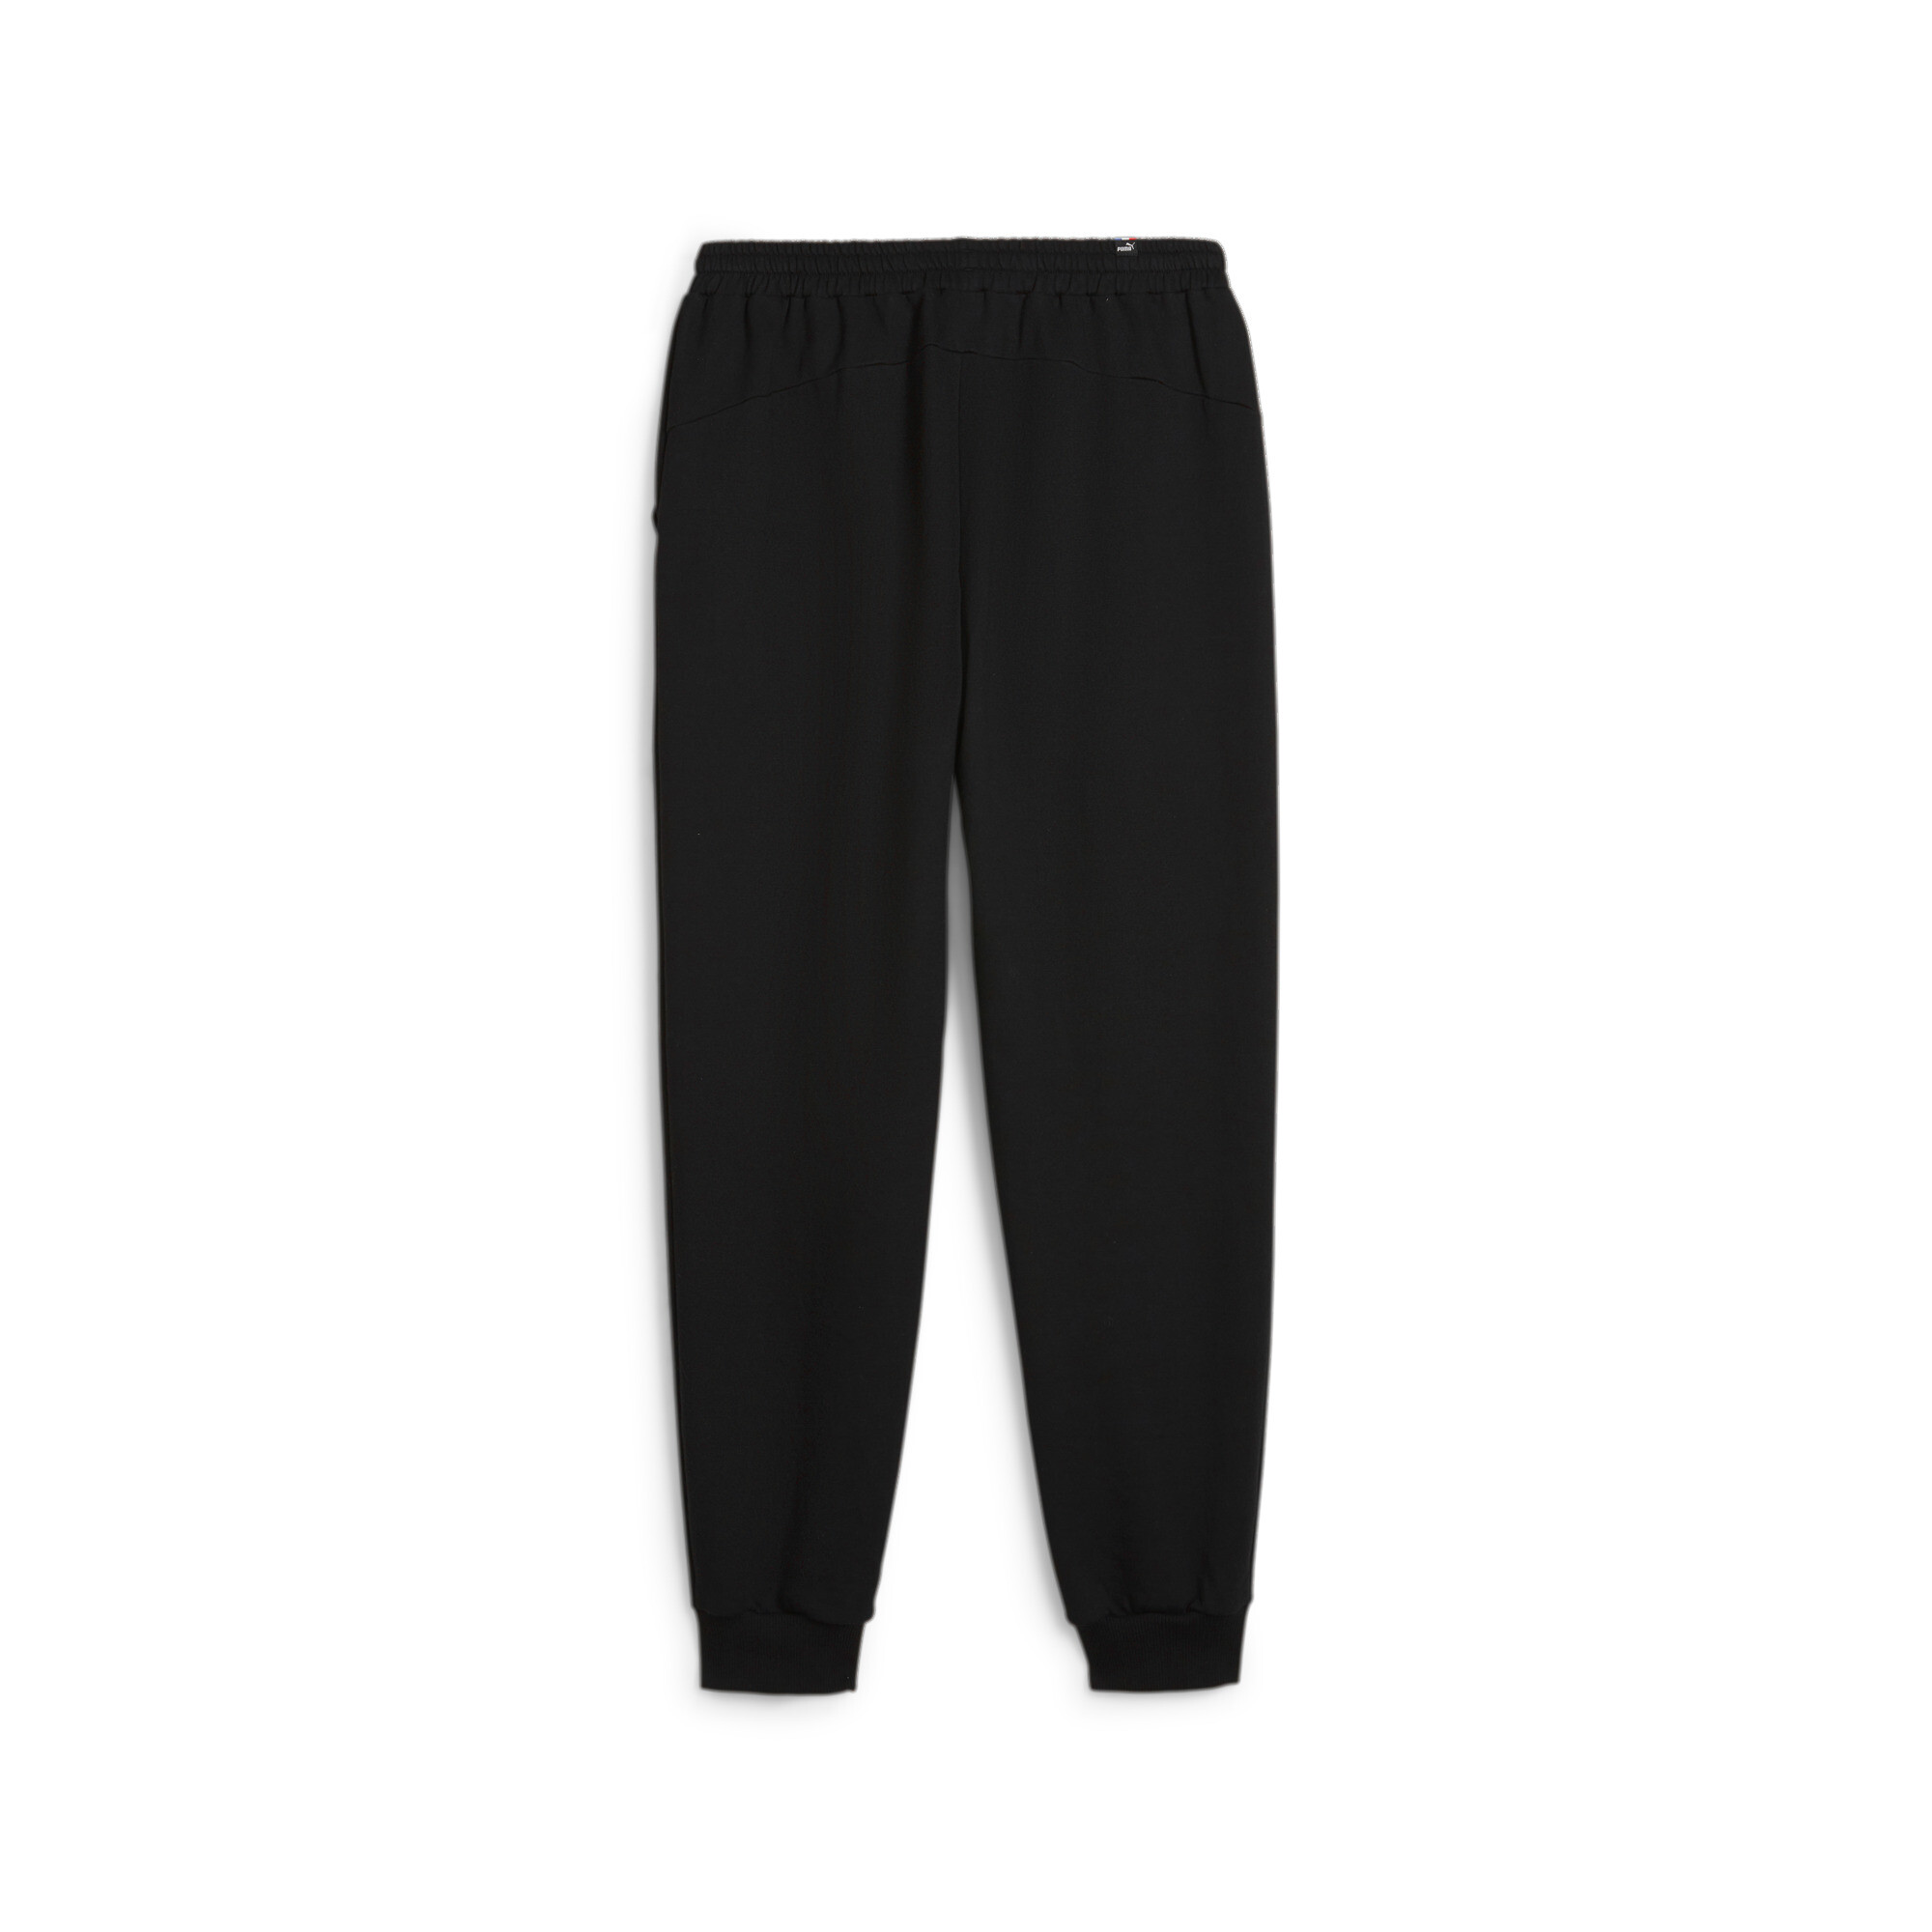 Puma Made In France Track Pants, Black, Size XS, Clothing